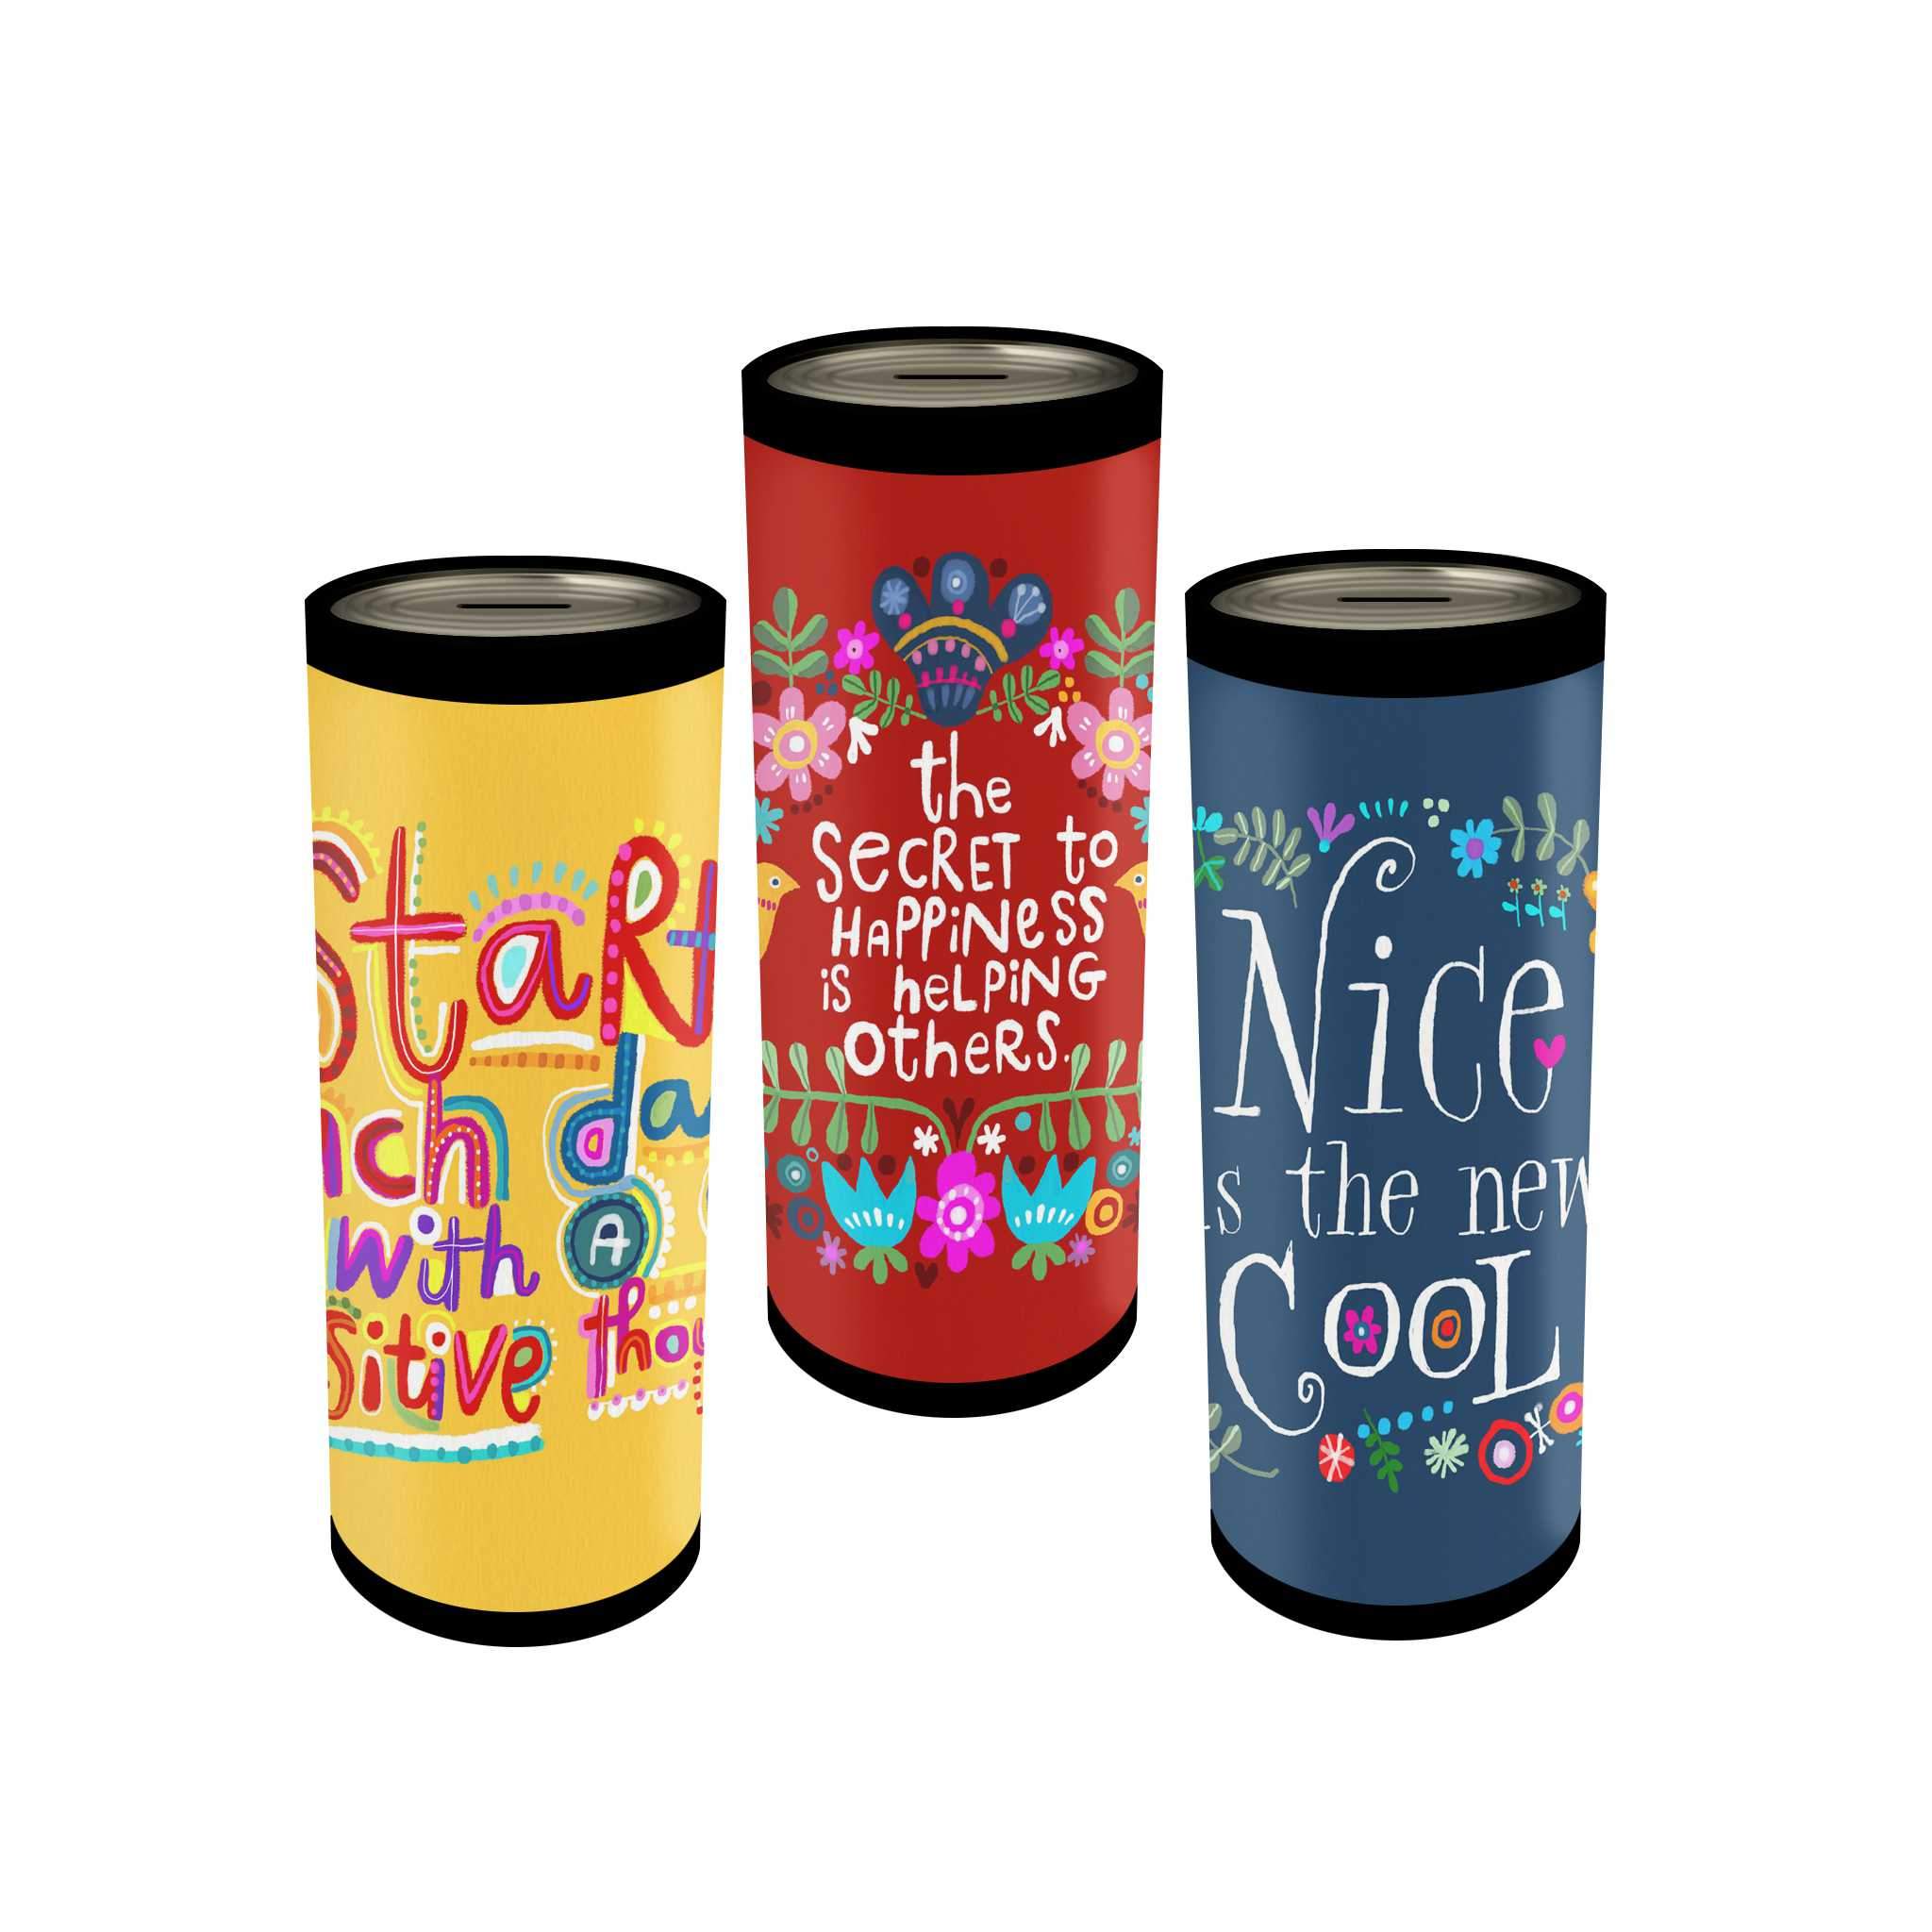 Affirmation Paper Tube Coin Bank